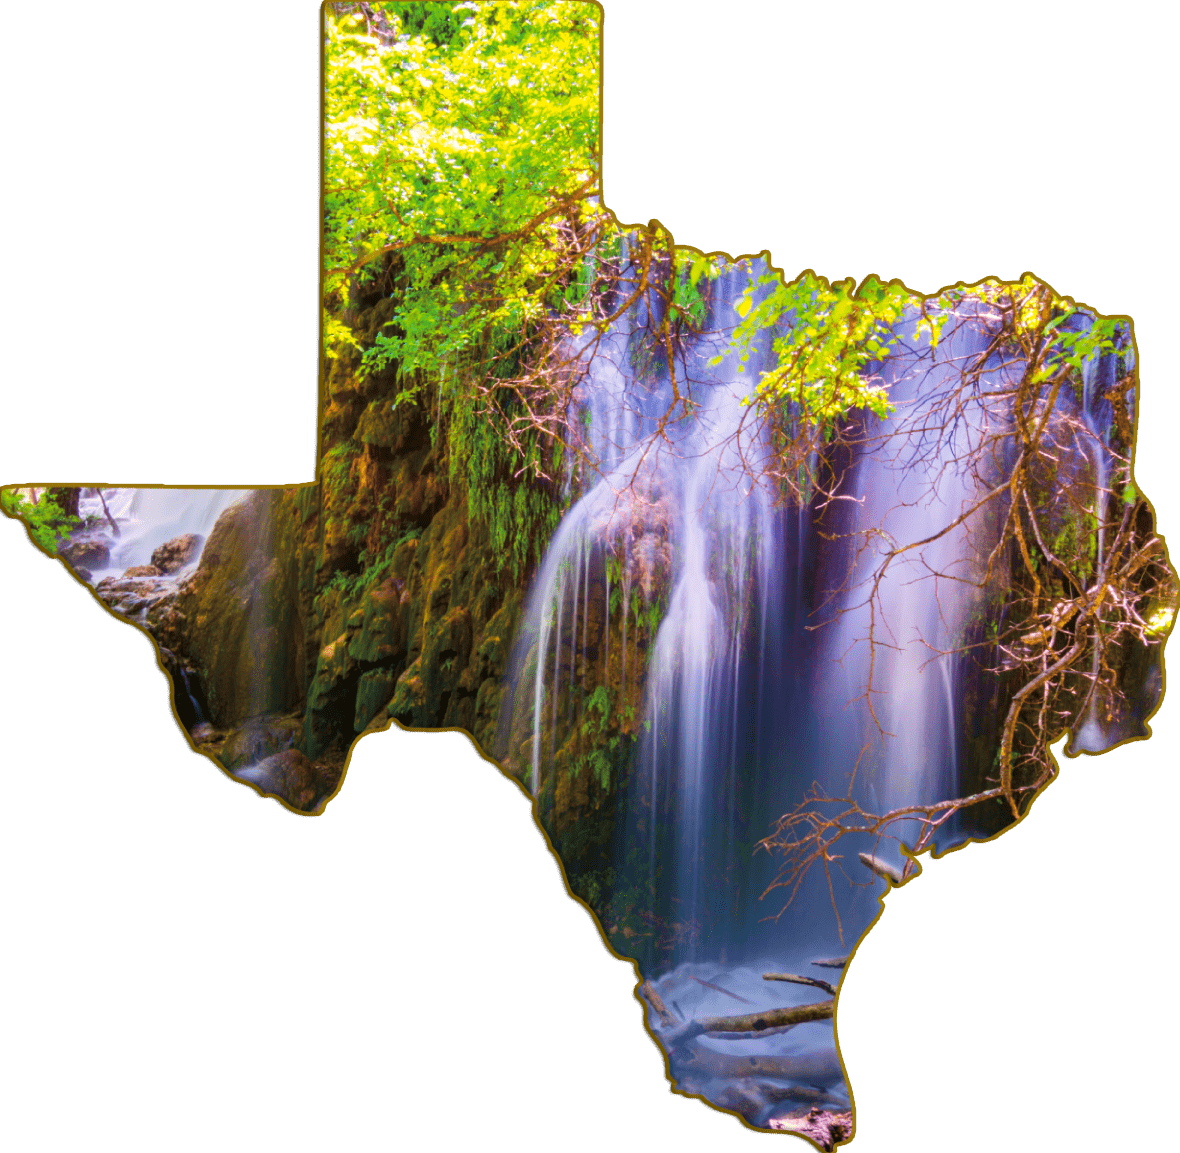 Wimberley Puzzle Company Refrigerator Magnets Gorman Falls Waterfall | Texas-Shaped Magnet